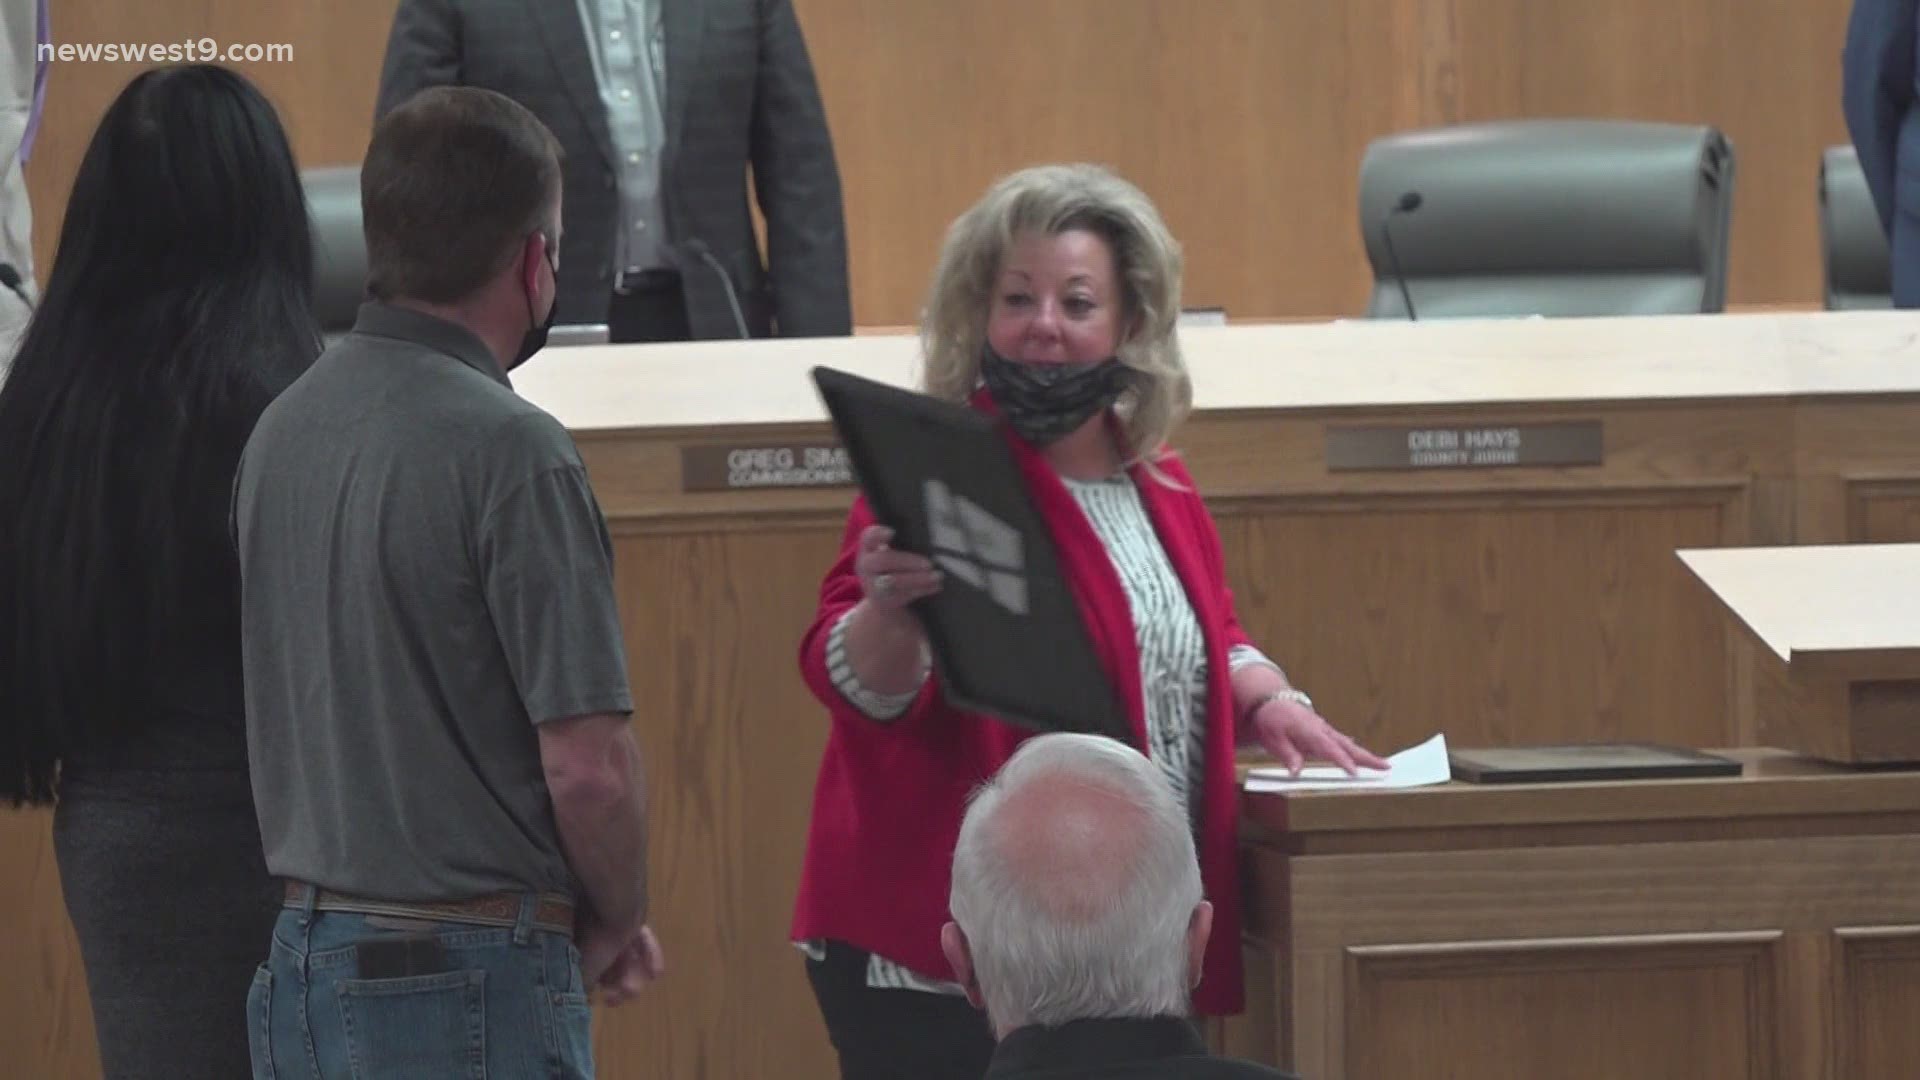 Ector County commissioners acknowledged several community members Tuesday for their outstanding work during the winter storm.